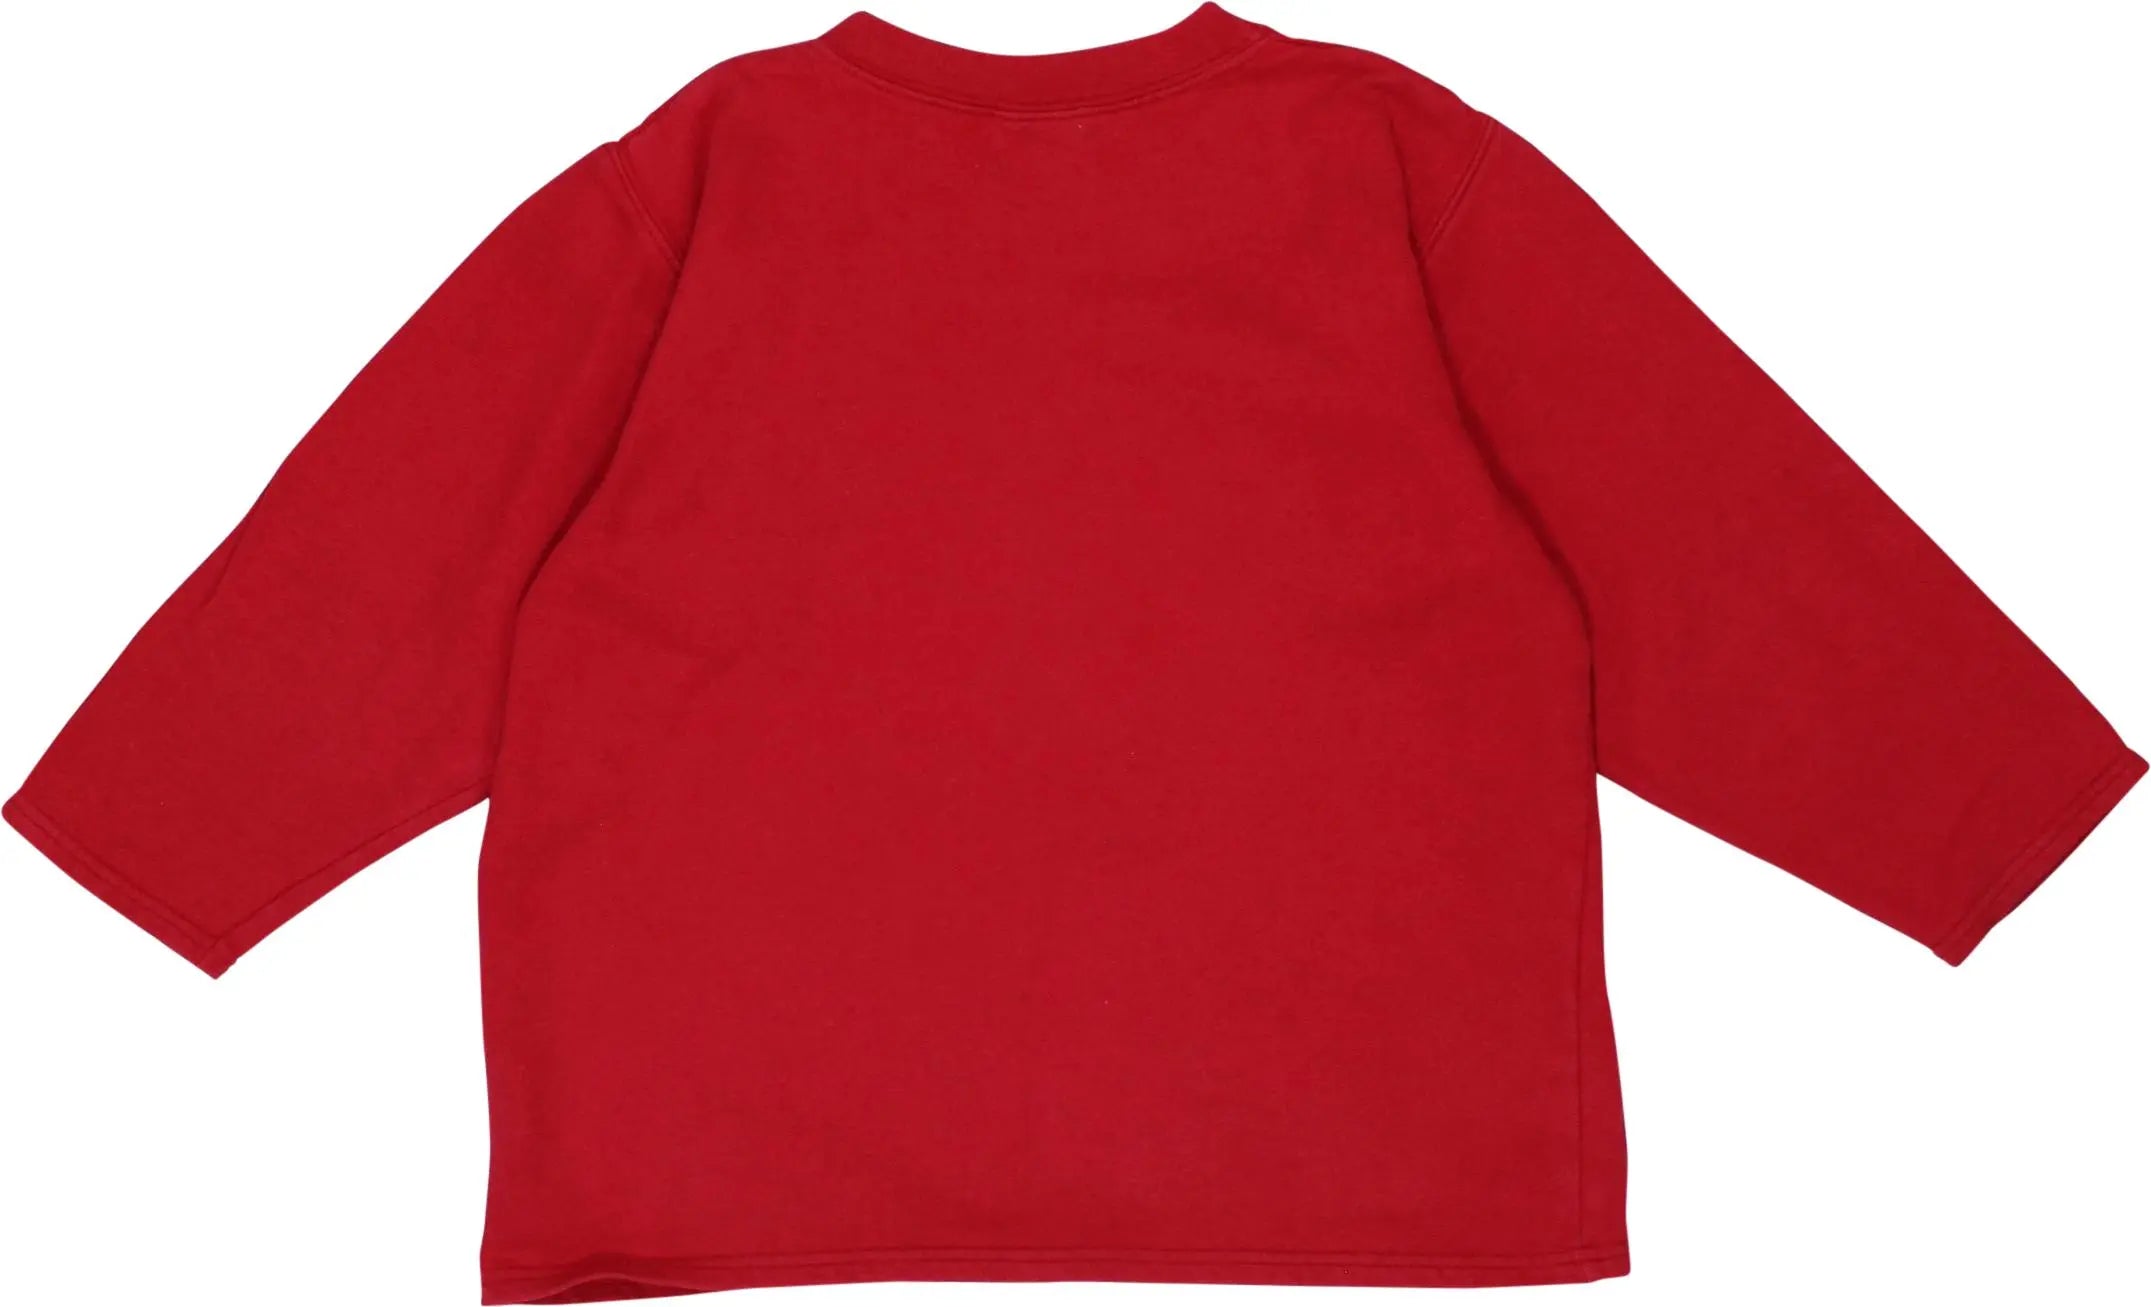 H&M - Red Sweatshirt by H&M- ThriftTale.com - Vintage and second handclothing